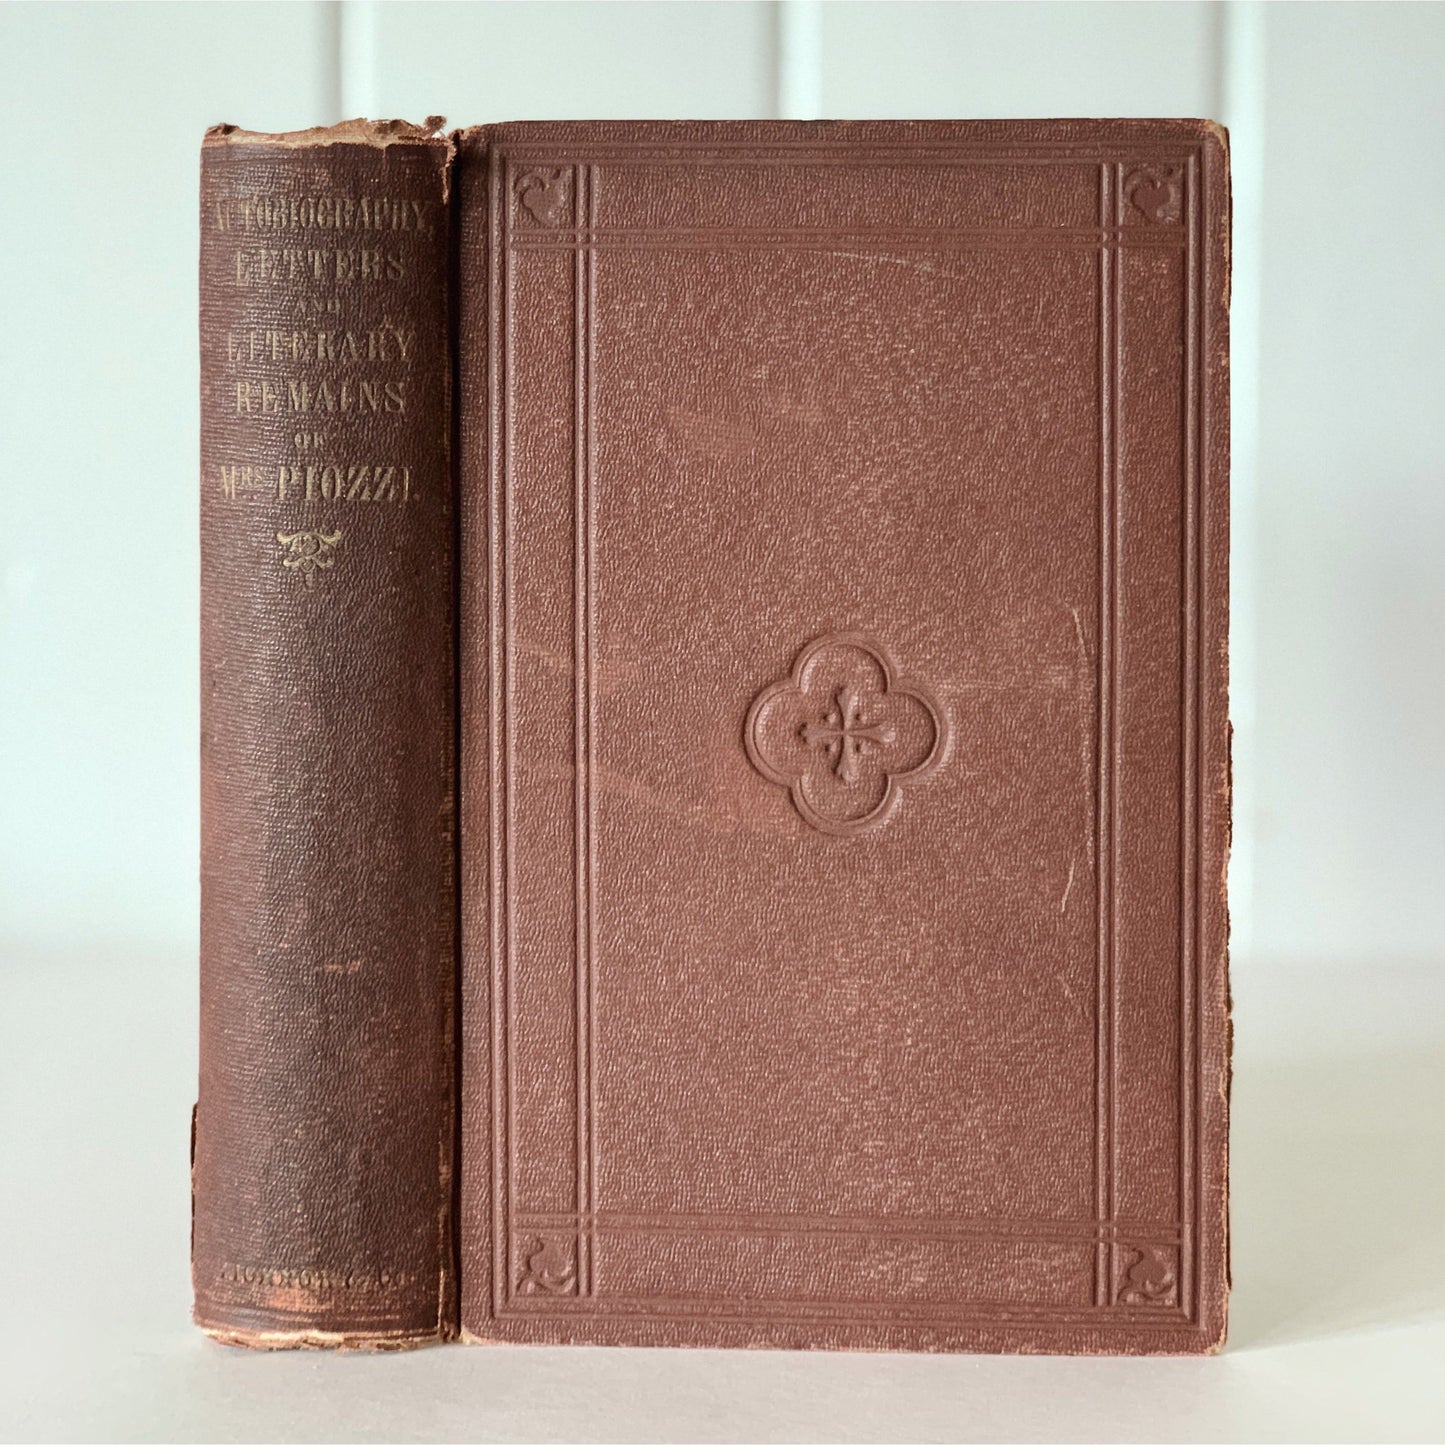 Autobiography, Letters, and Literary Remains of Mrs. Piozzi (Thrale), 1861